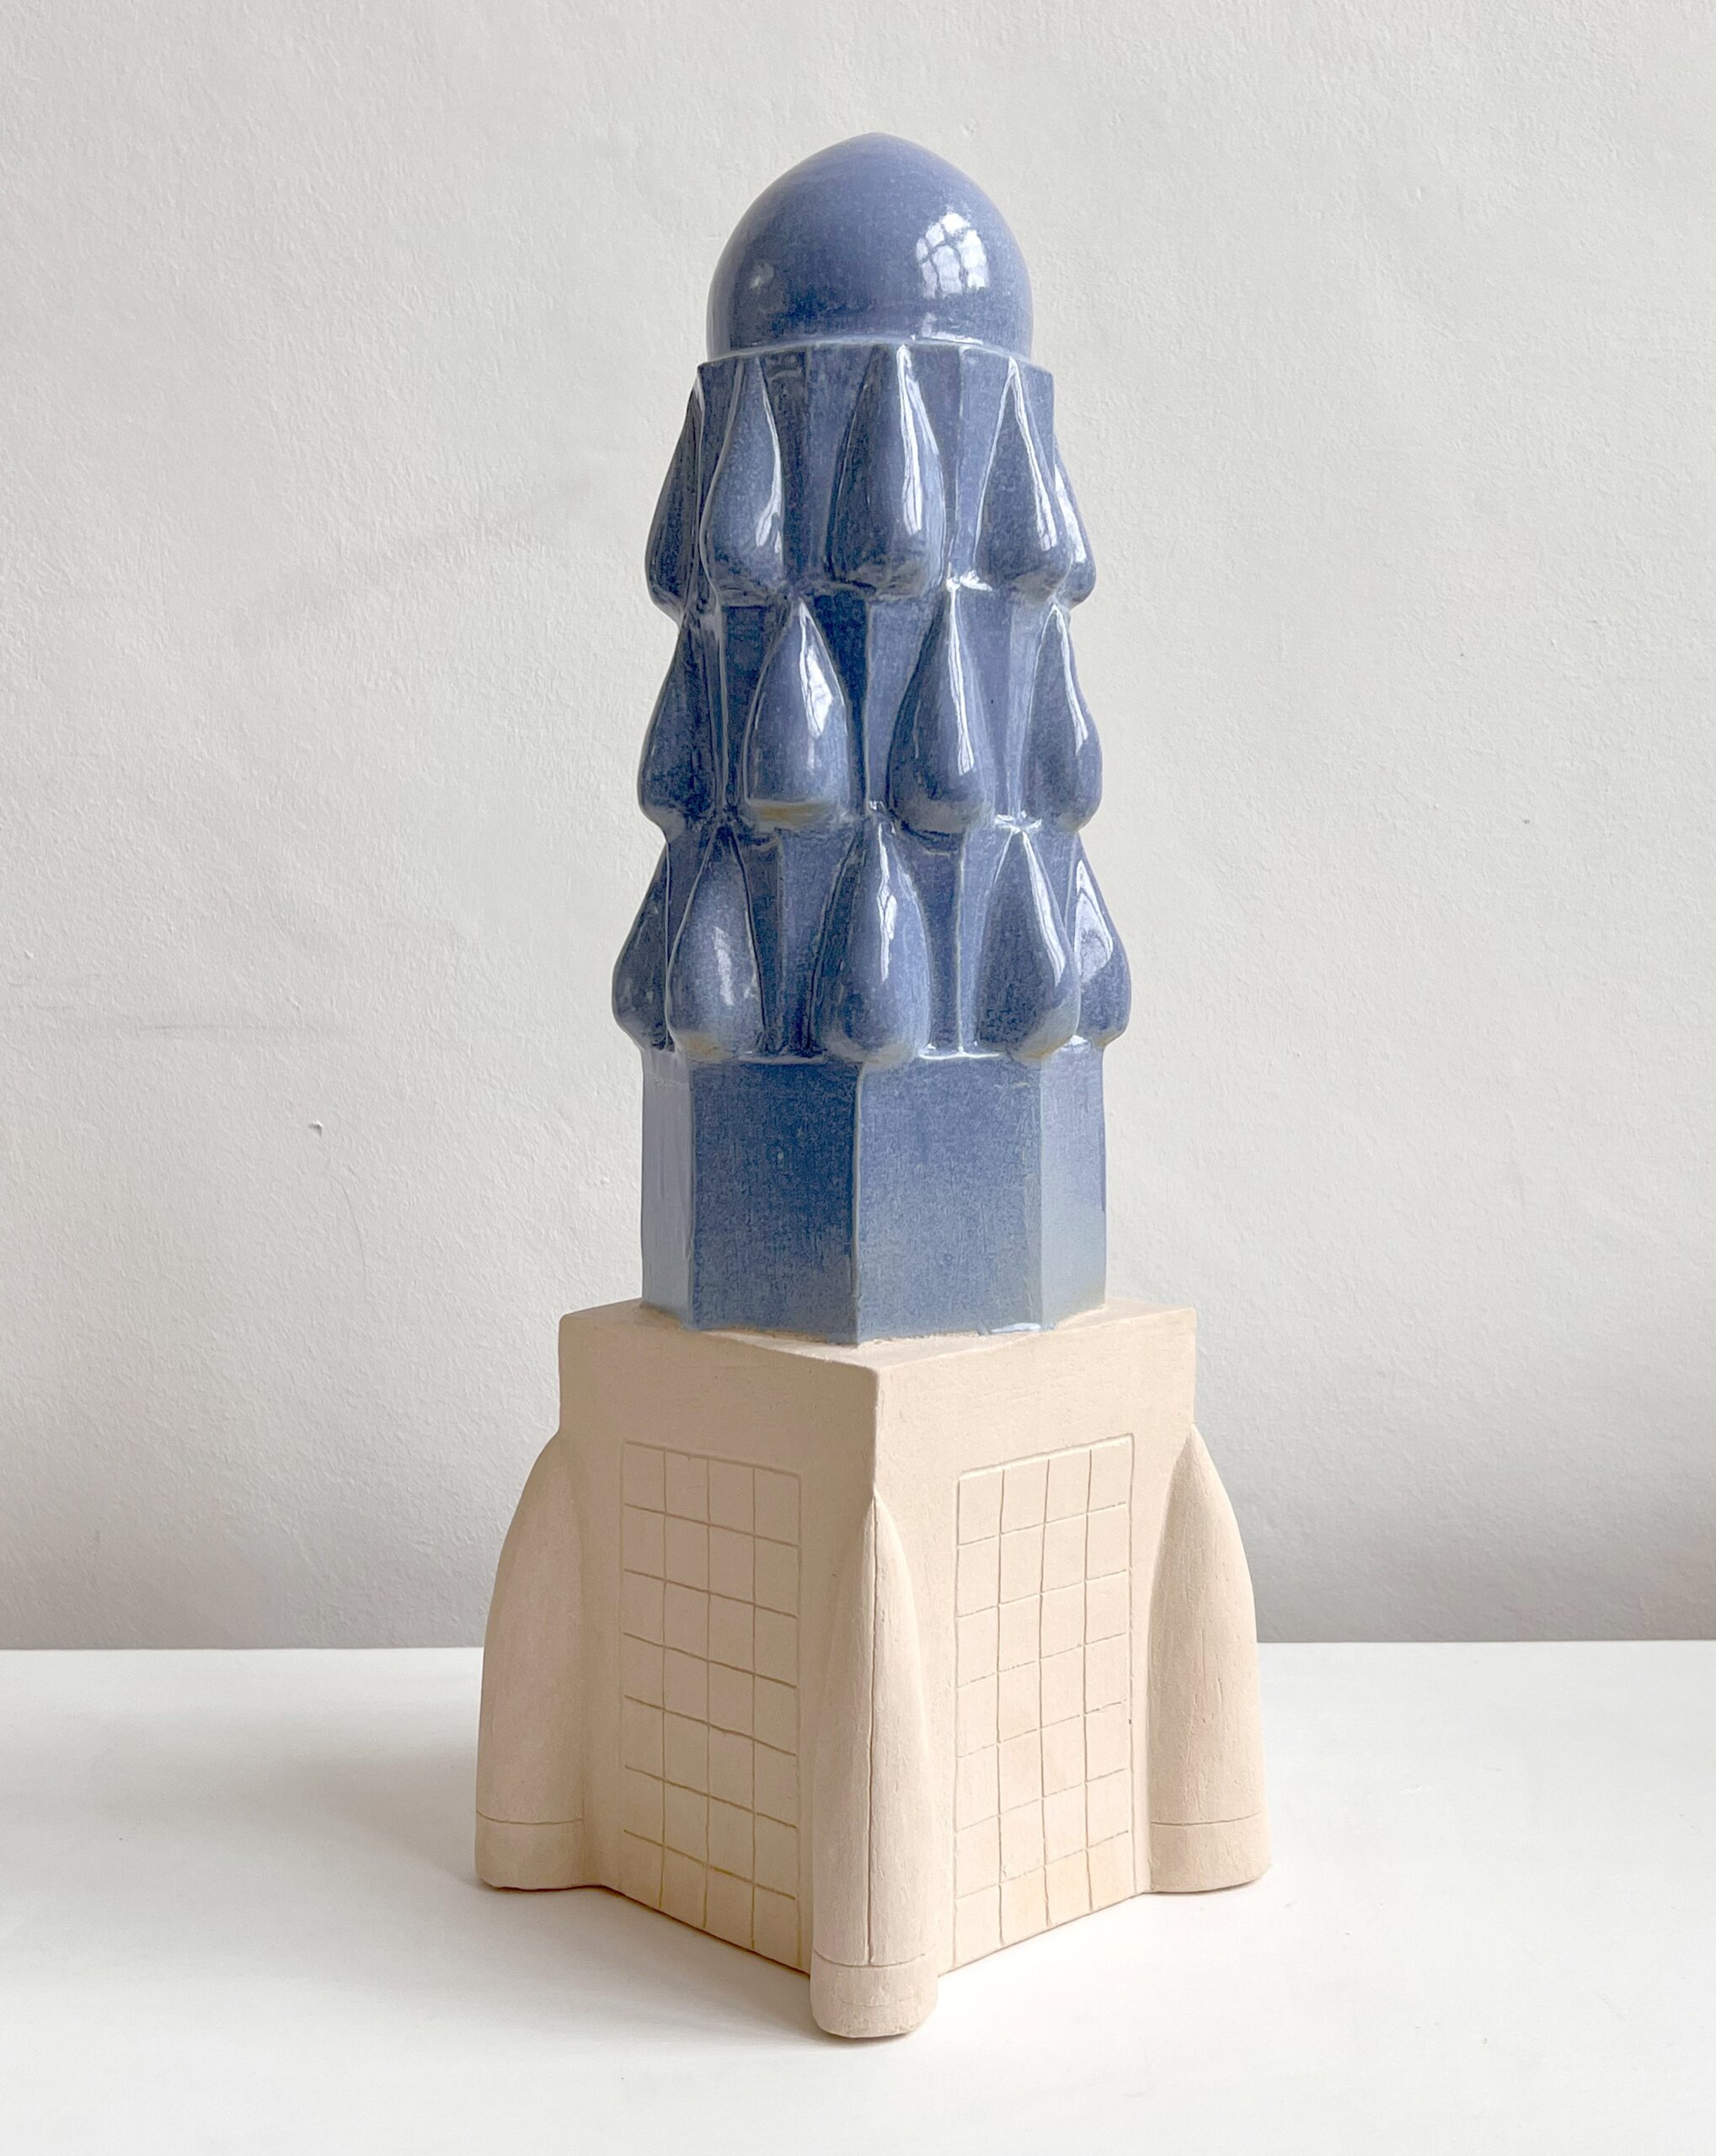 Blue dome-shaped sculpture with rounded top and water-droplet shaped designs on the side mounted on a being base